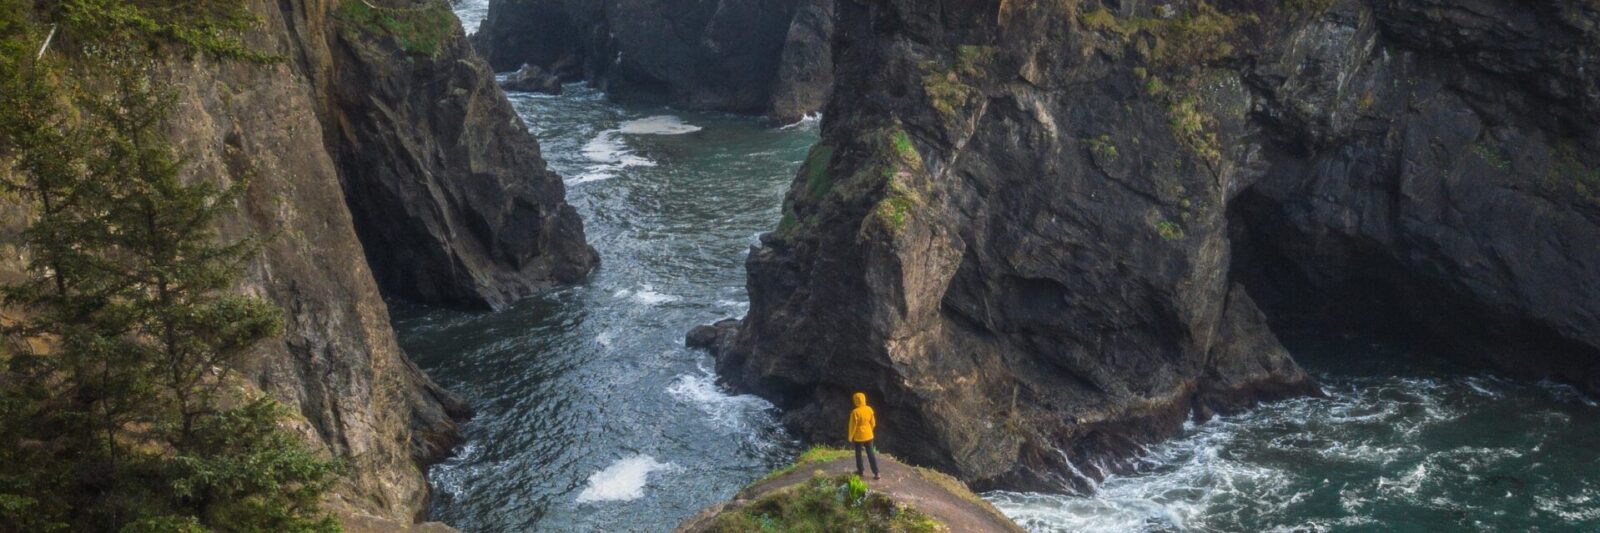 a person hiking in a yellow jacket on a rock bridge on the Oregon Coast